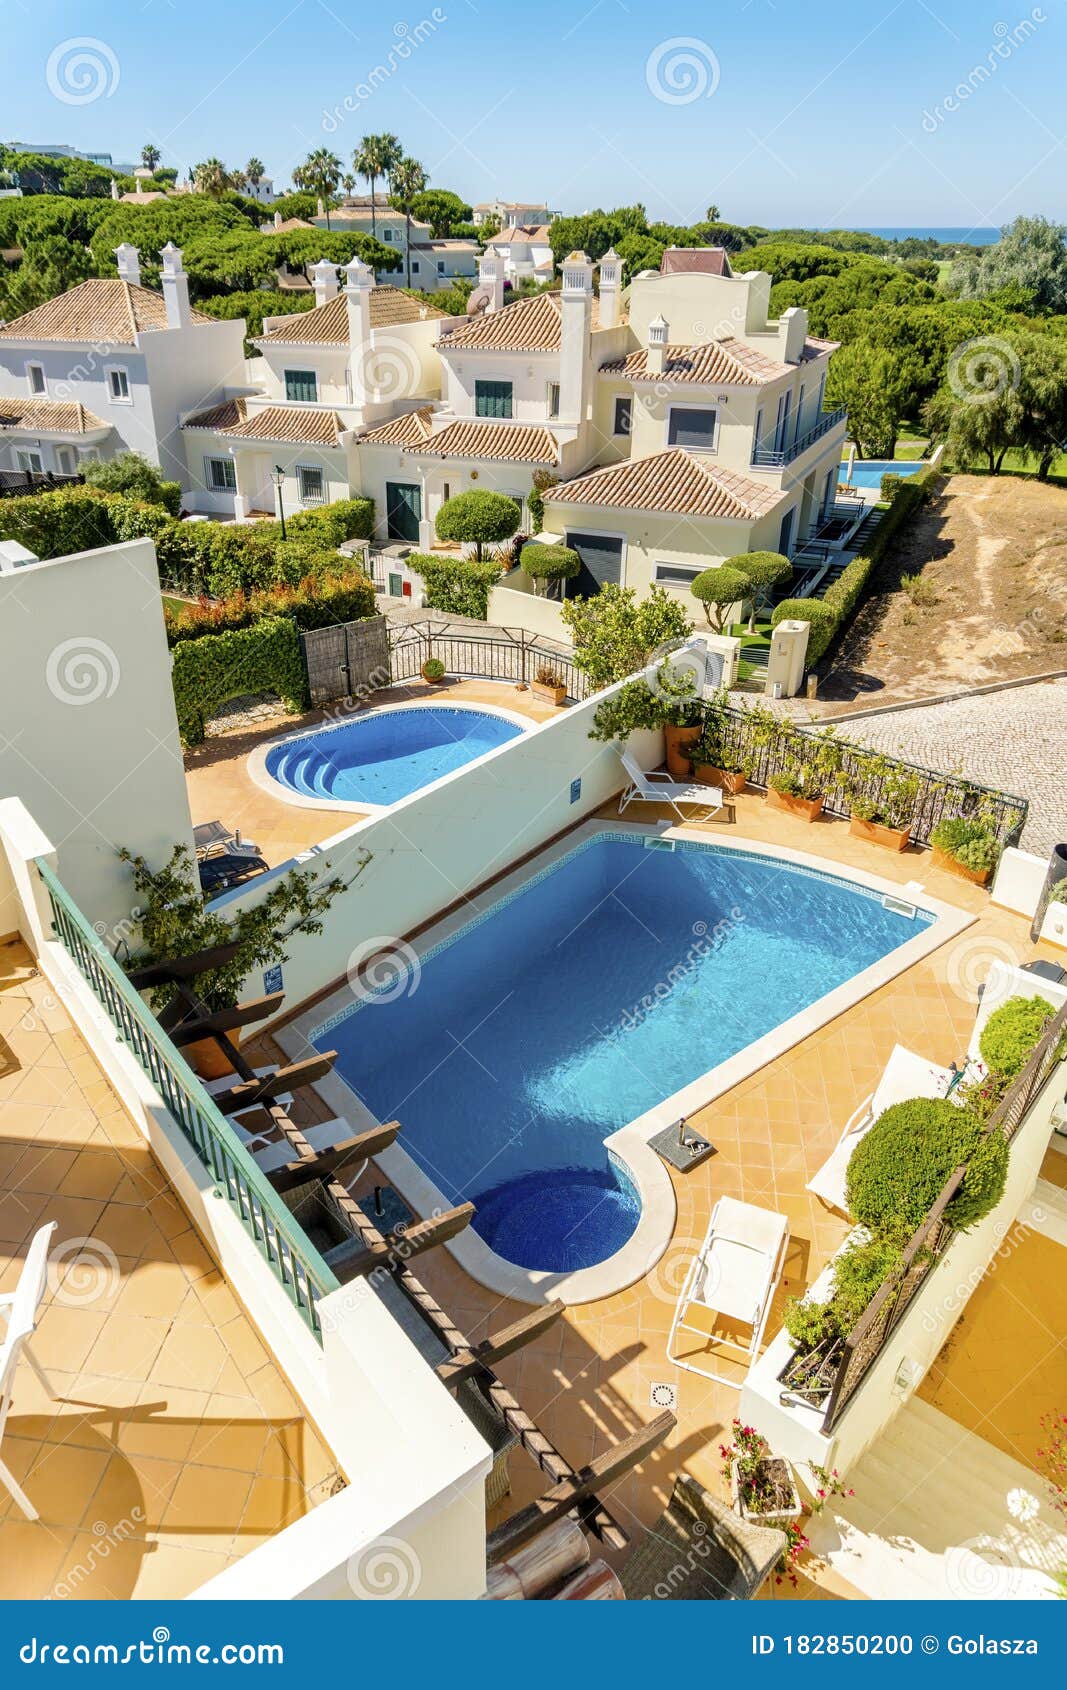 luxury houses with swimming pools in quinta do lago, algarve, portugal